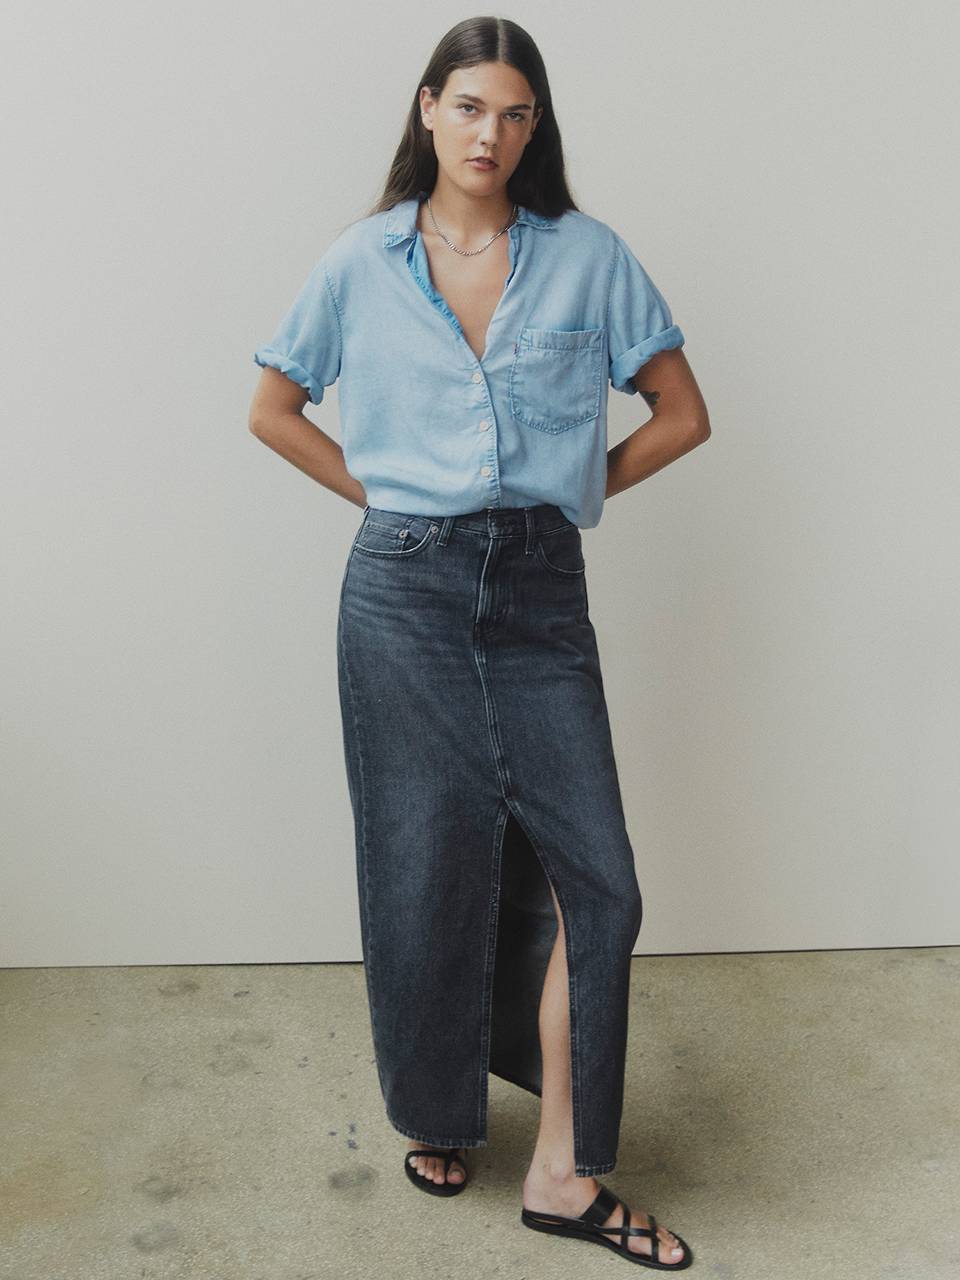 Image of model in Levi's Icon Skirt.